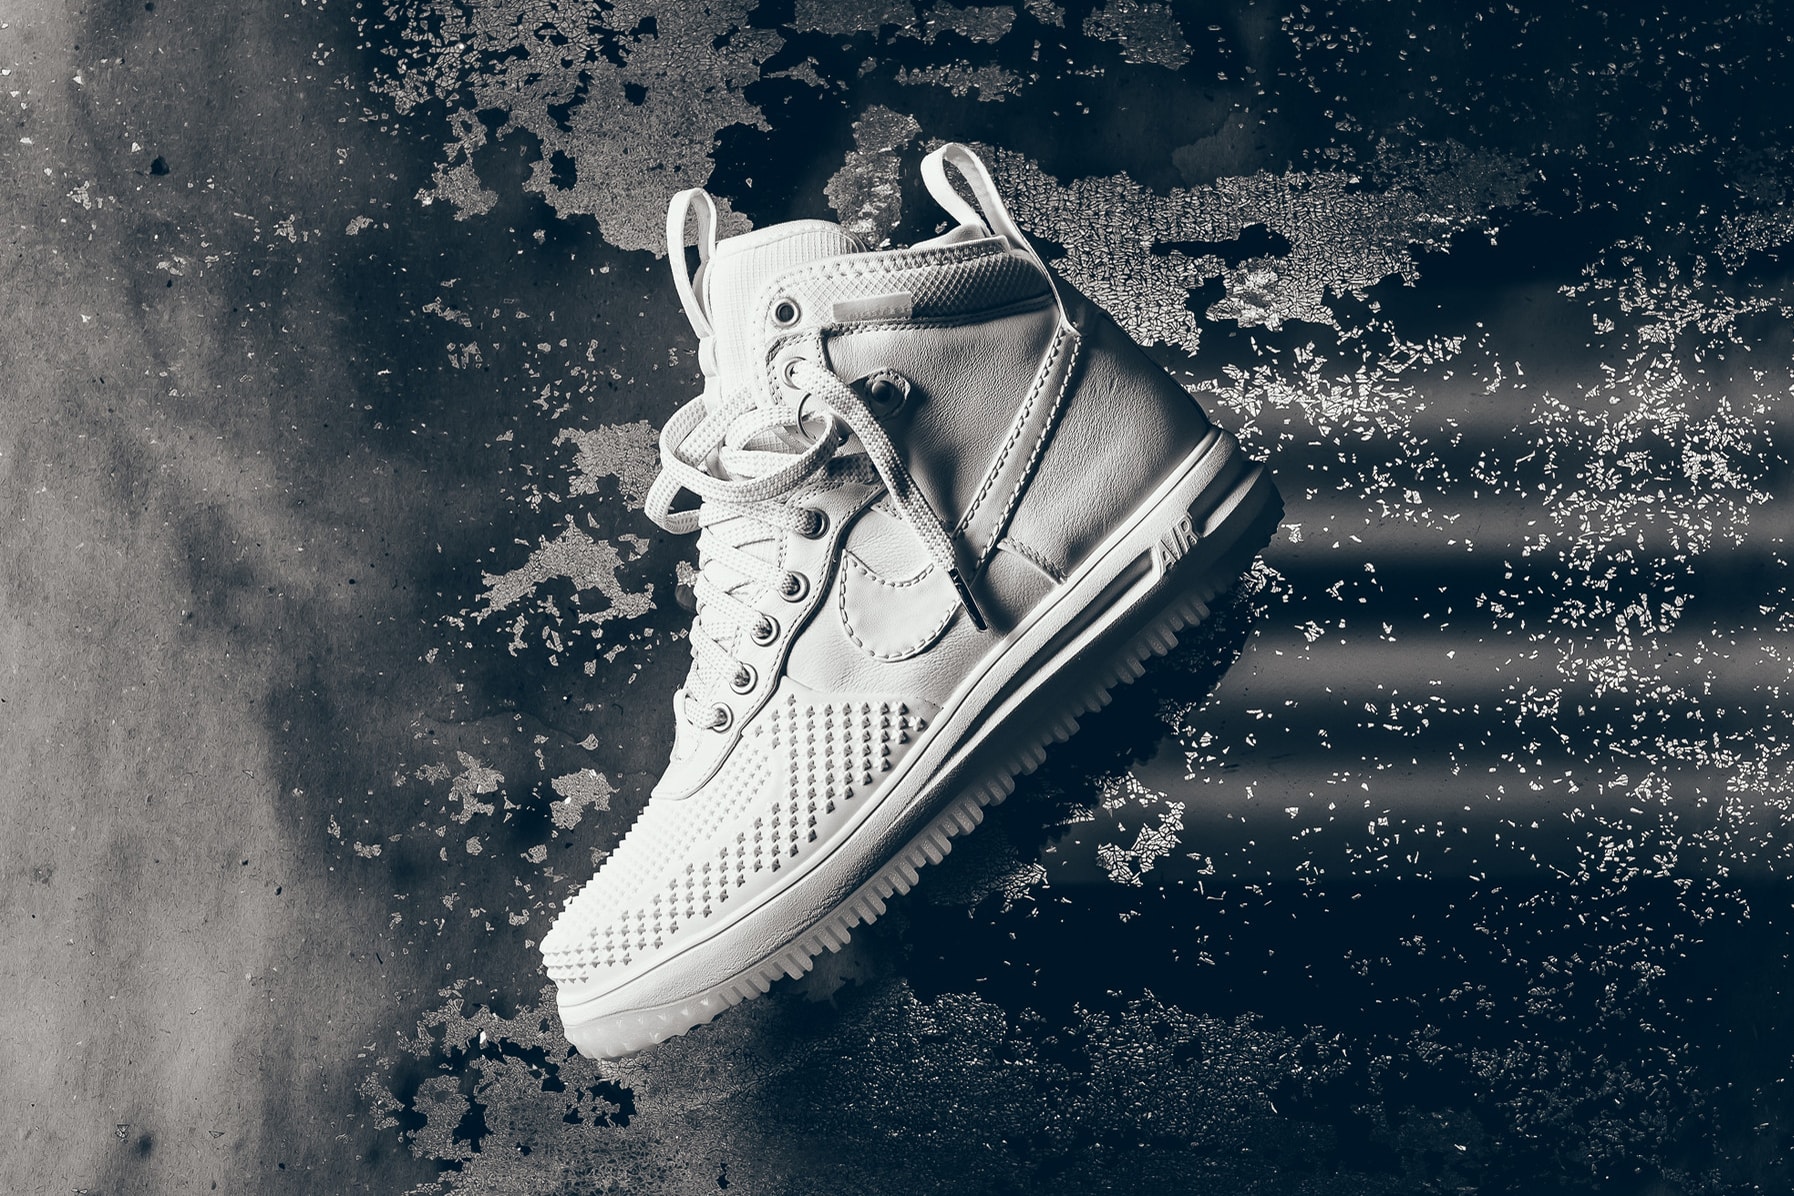 Nike Wraps Lunar Force 1 In Ice White |